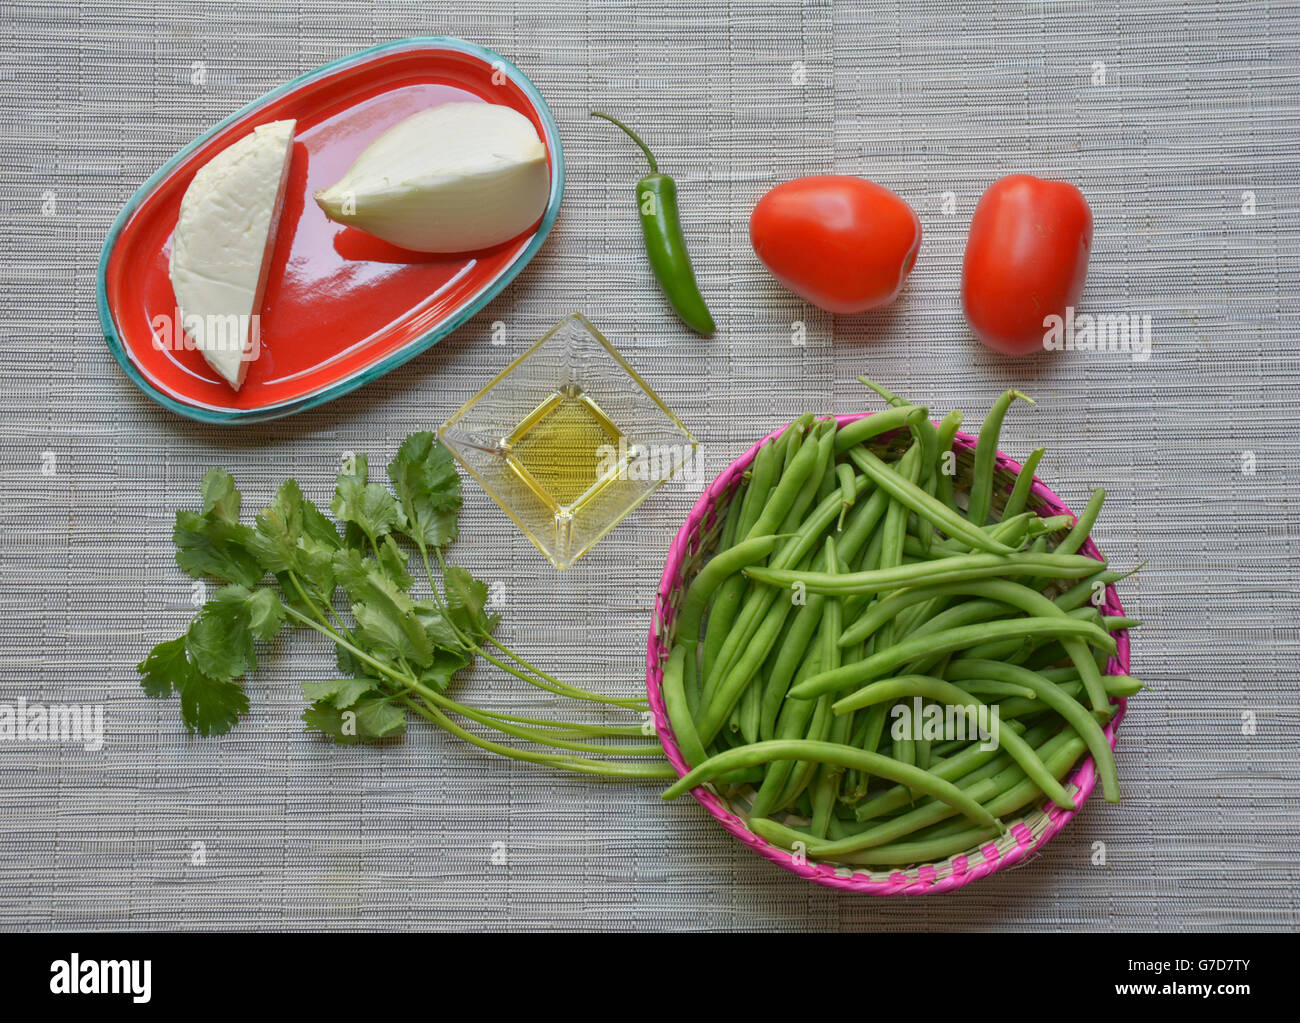 Mexican food ingredients Stock Photo